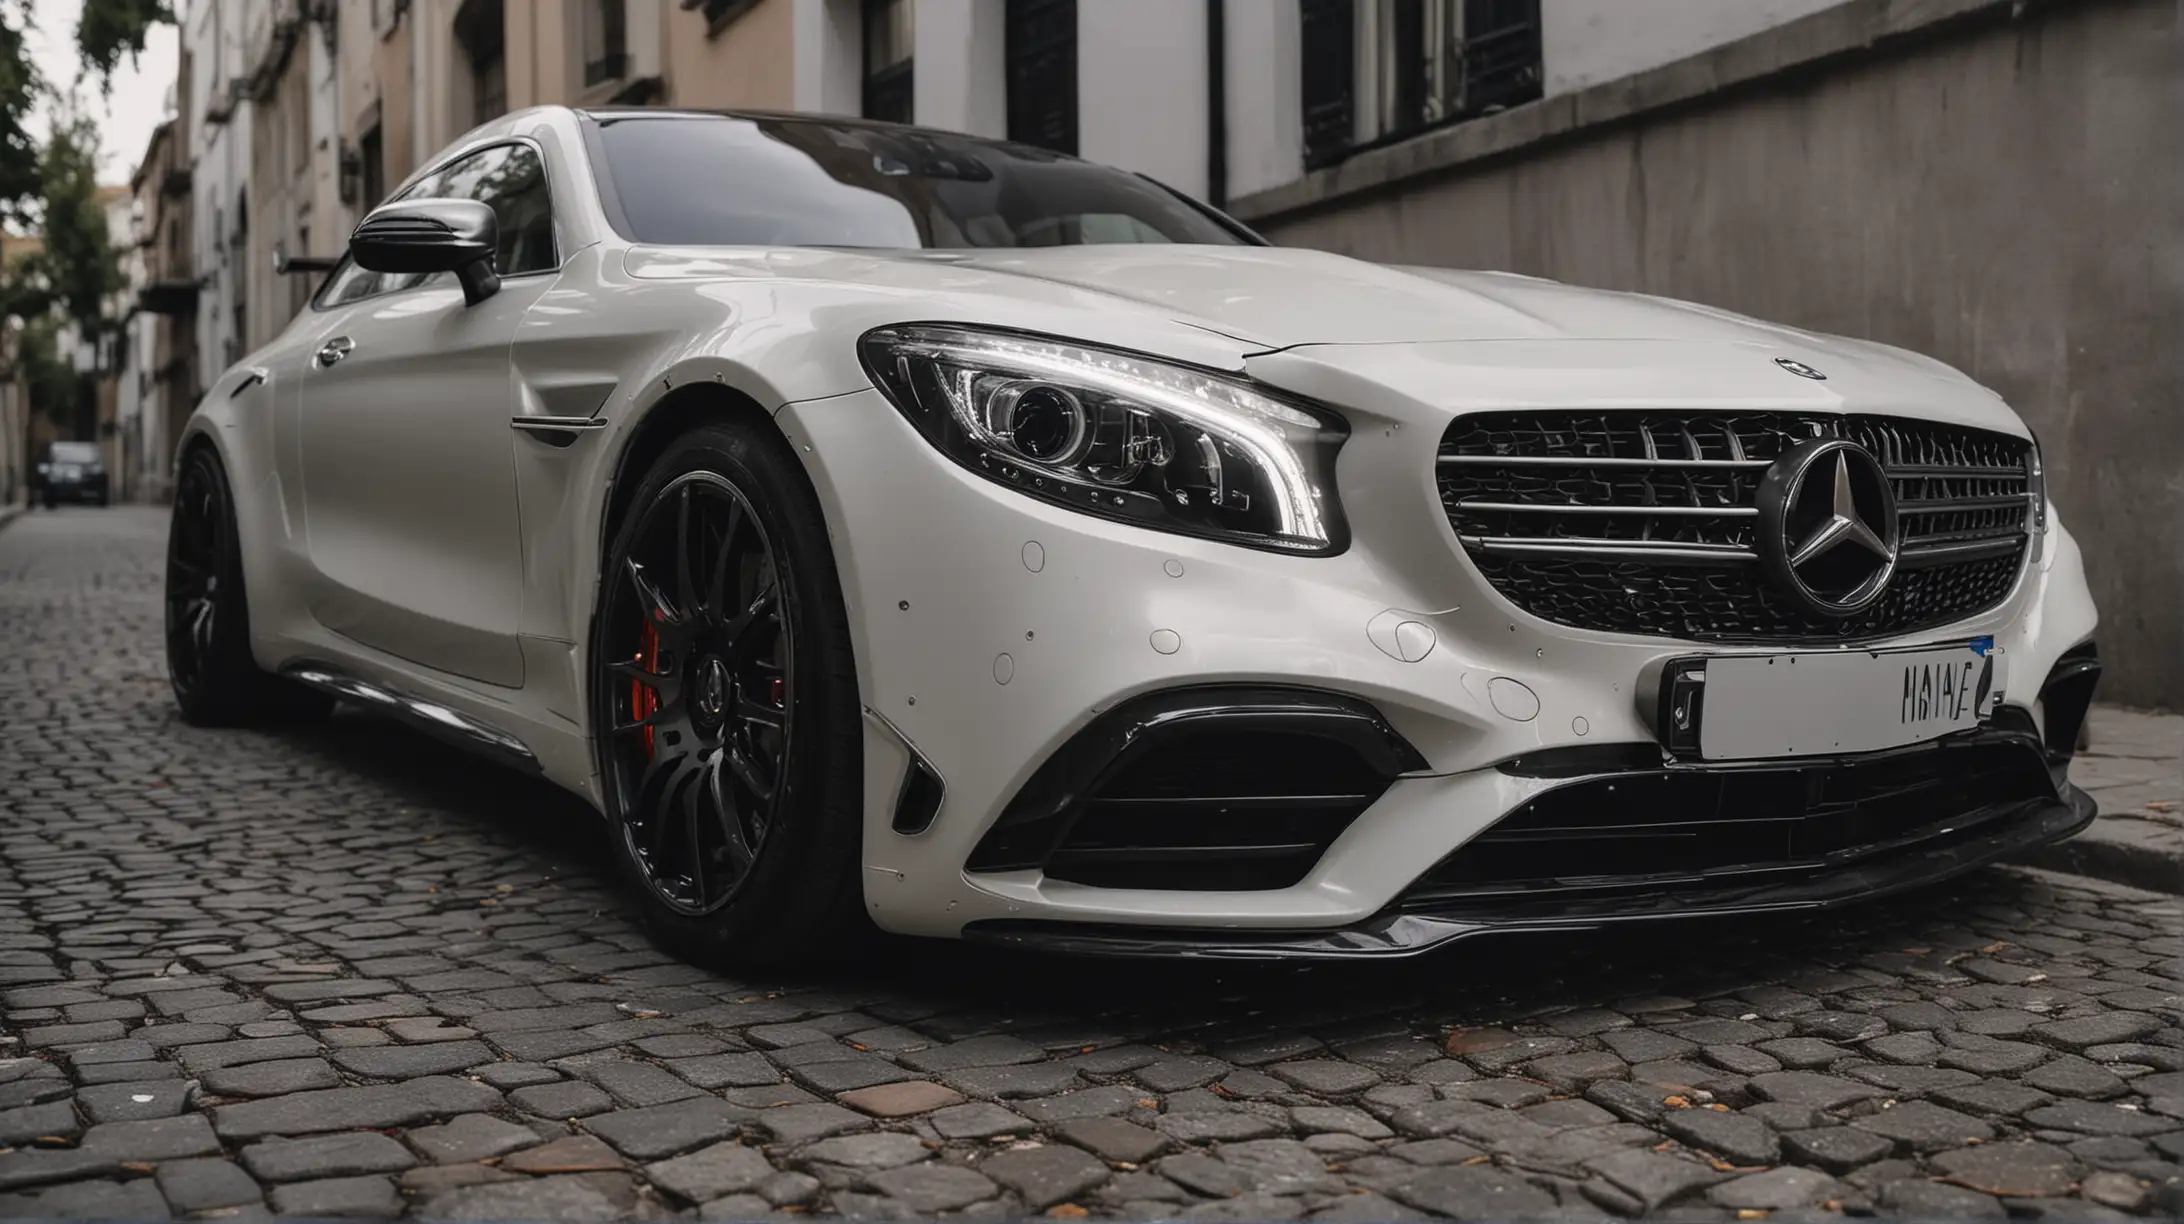 Luxury Automobile Mercedes AMG with Headlights On